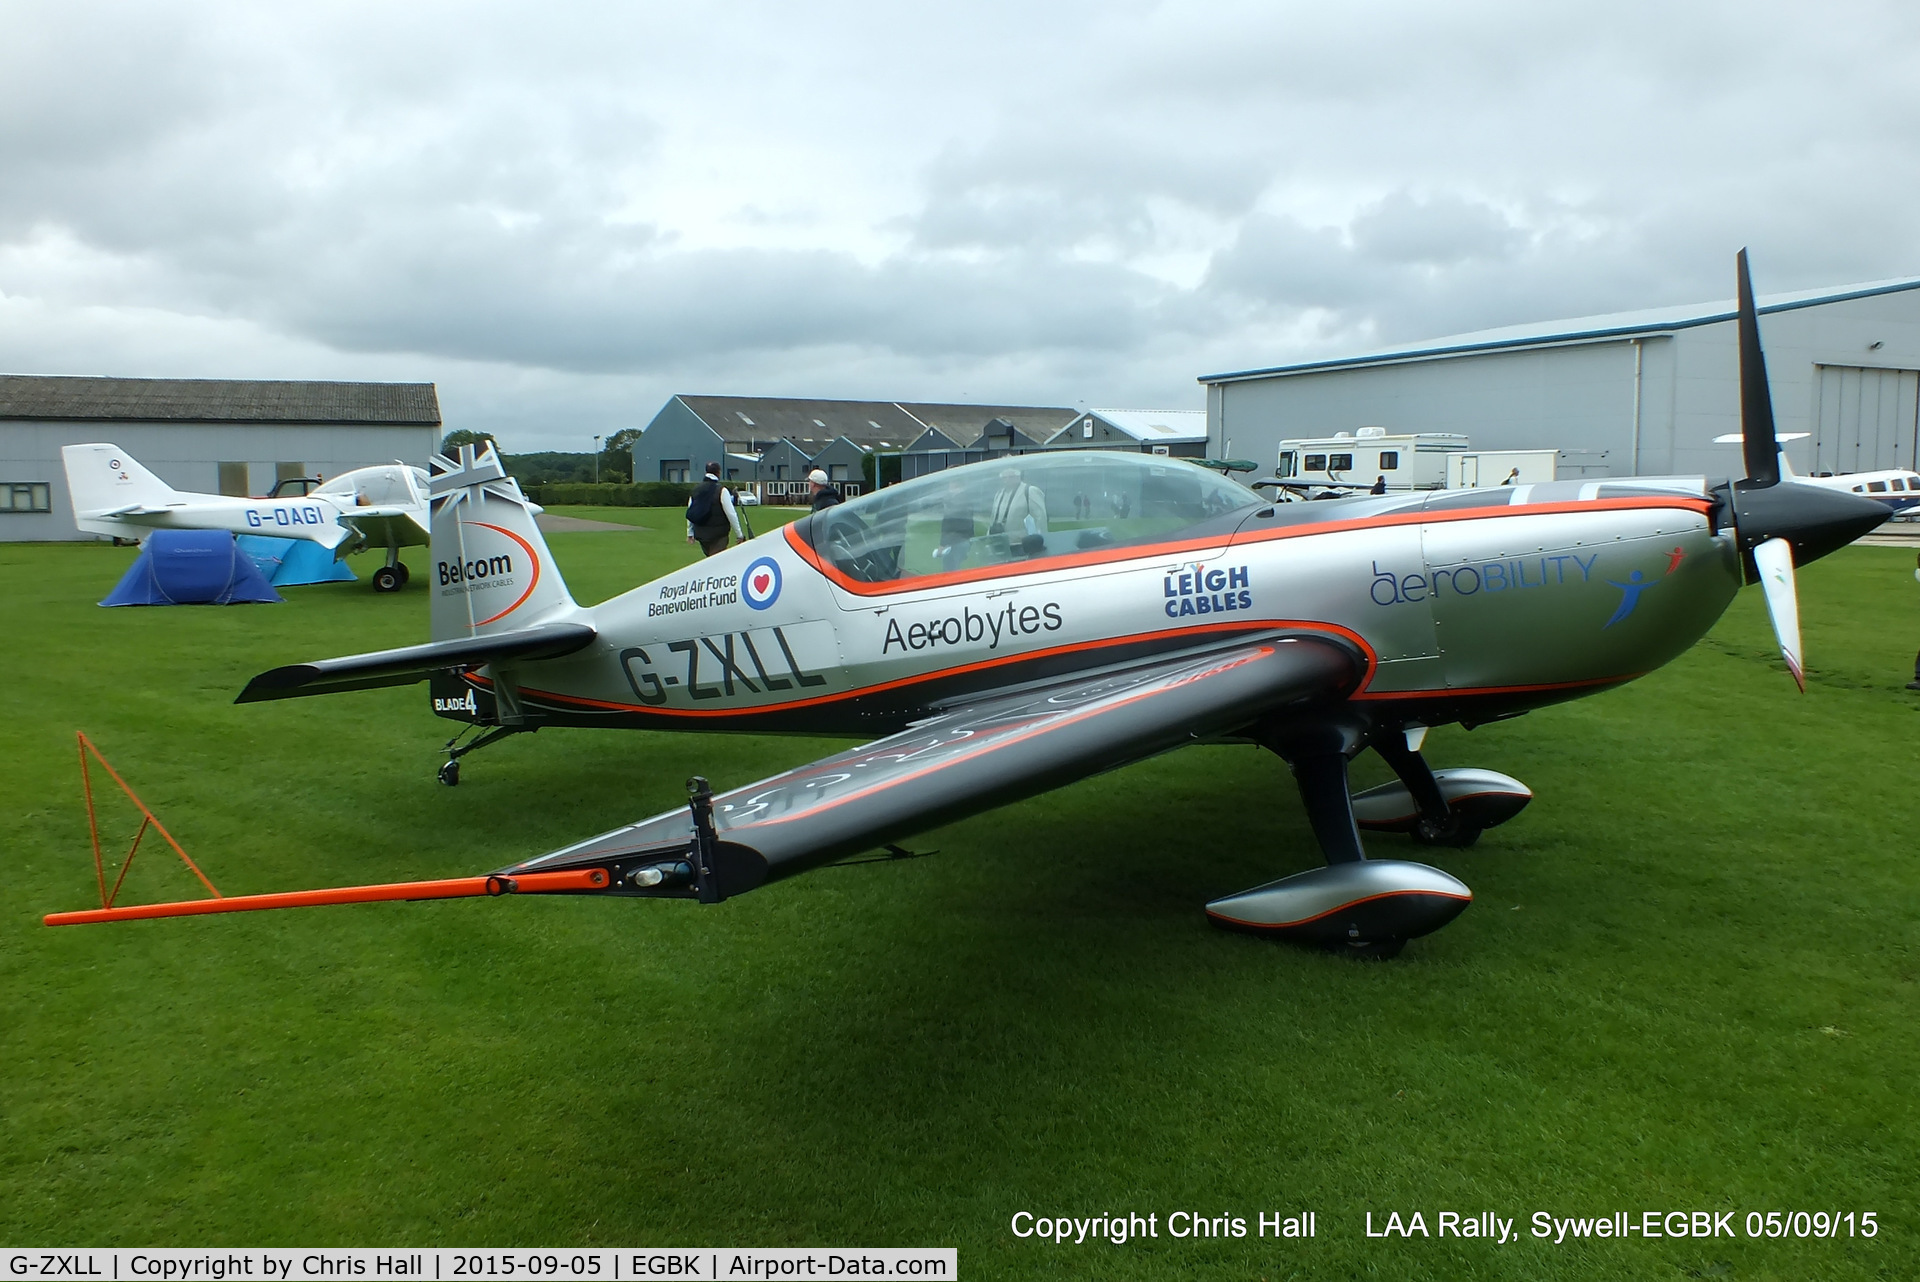 G-ZXLL, 2011 Extra EA-300L C/N 1319, at the LAA Rally 2015, Sywell